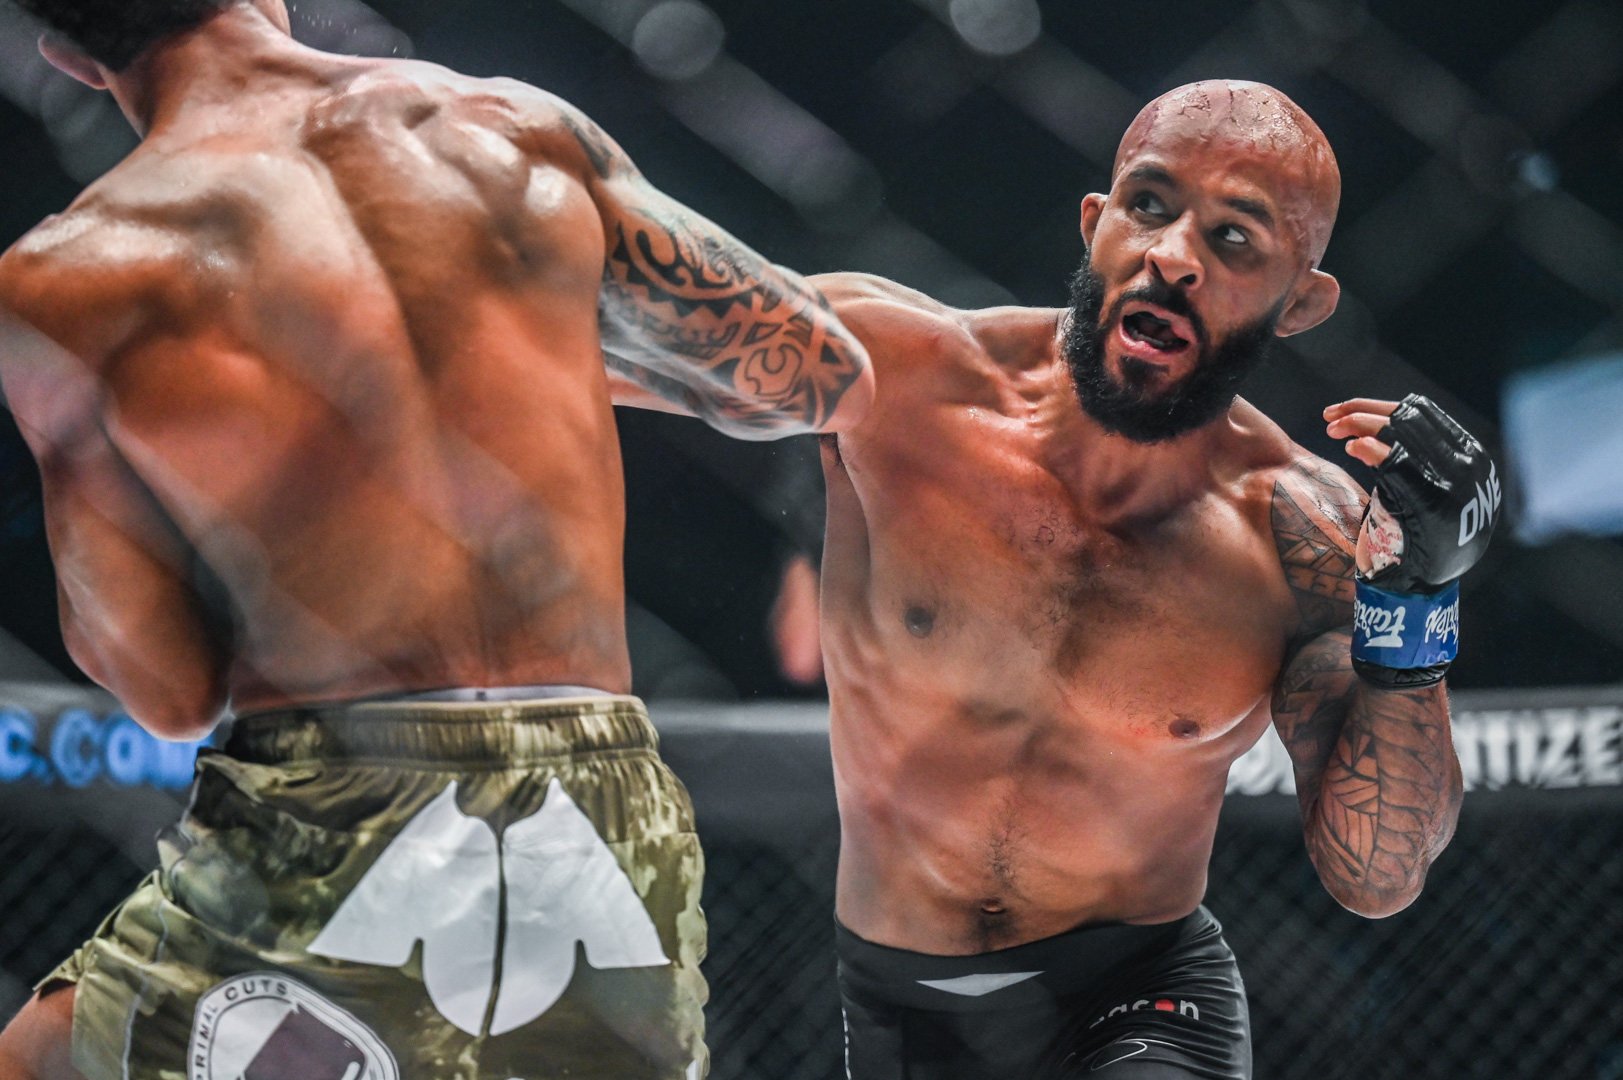 Demetrious Johnson throws a punch at Adriano Moraes at ONE on Prime Video 1. Photo: ONE Championship.